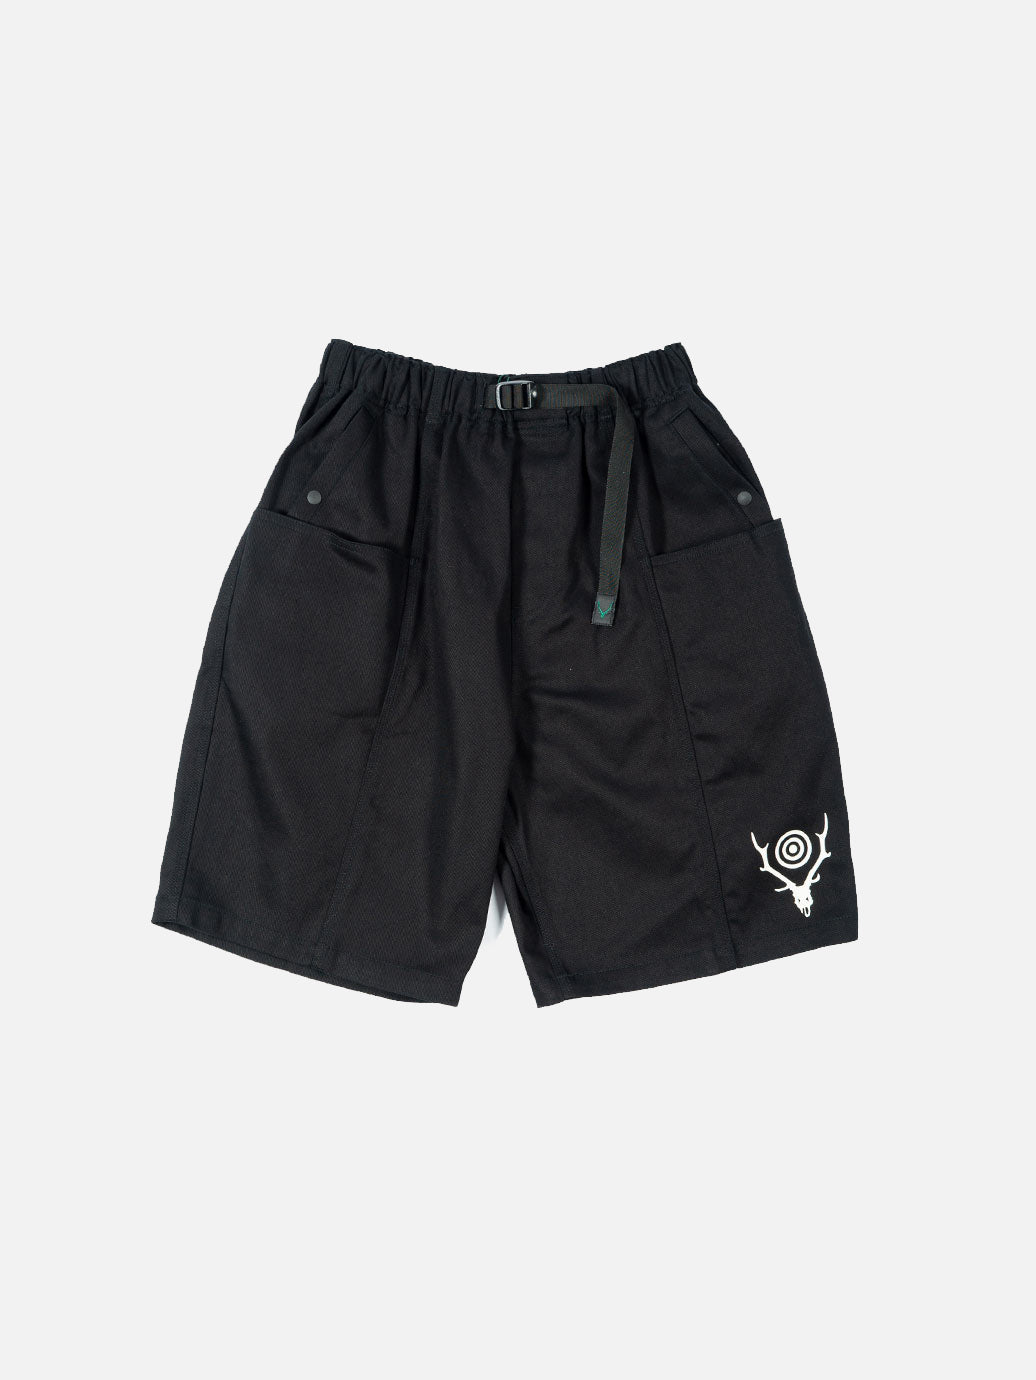 SOUTH2 WEST8 Belted C.S. Short